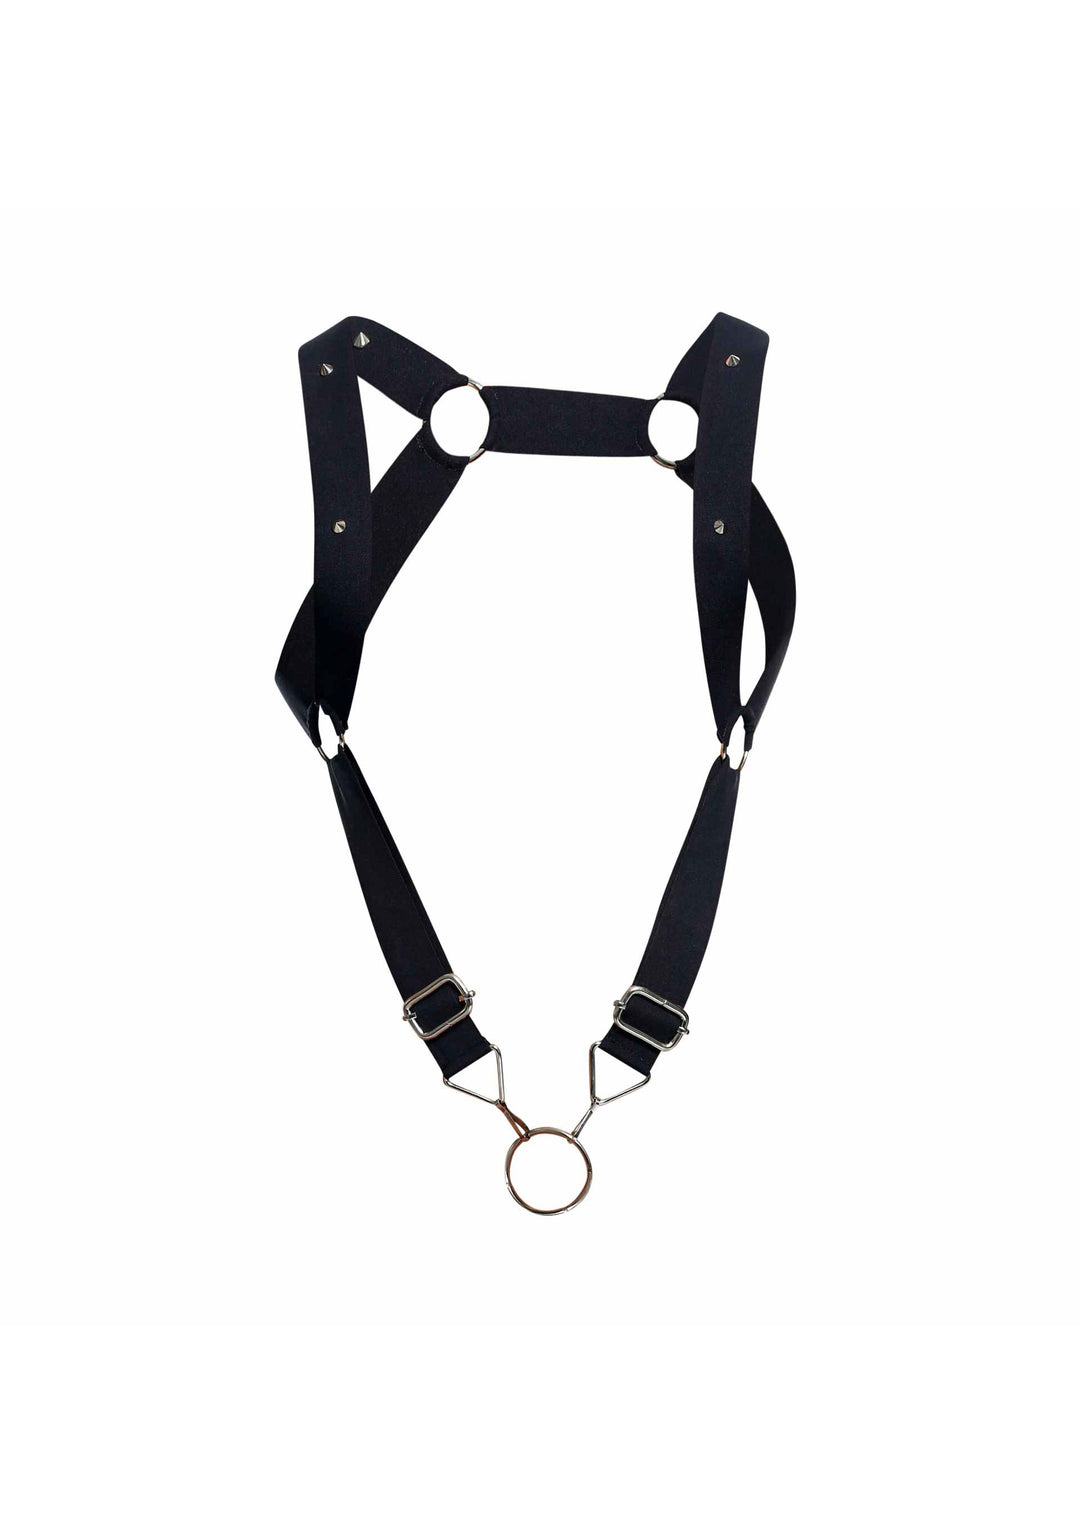 DNGEON Straigh Back Harness Cock Ring